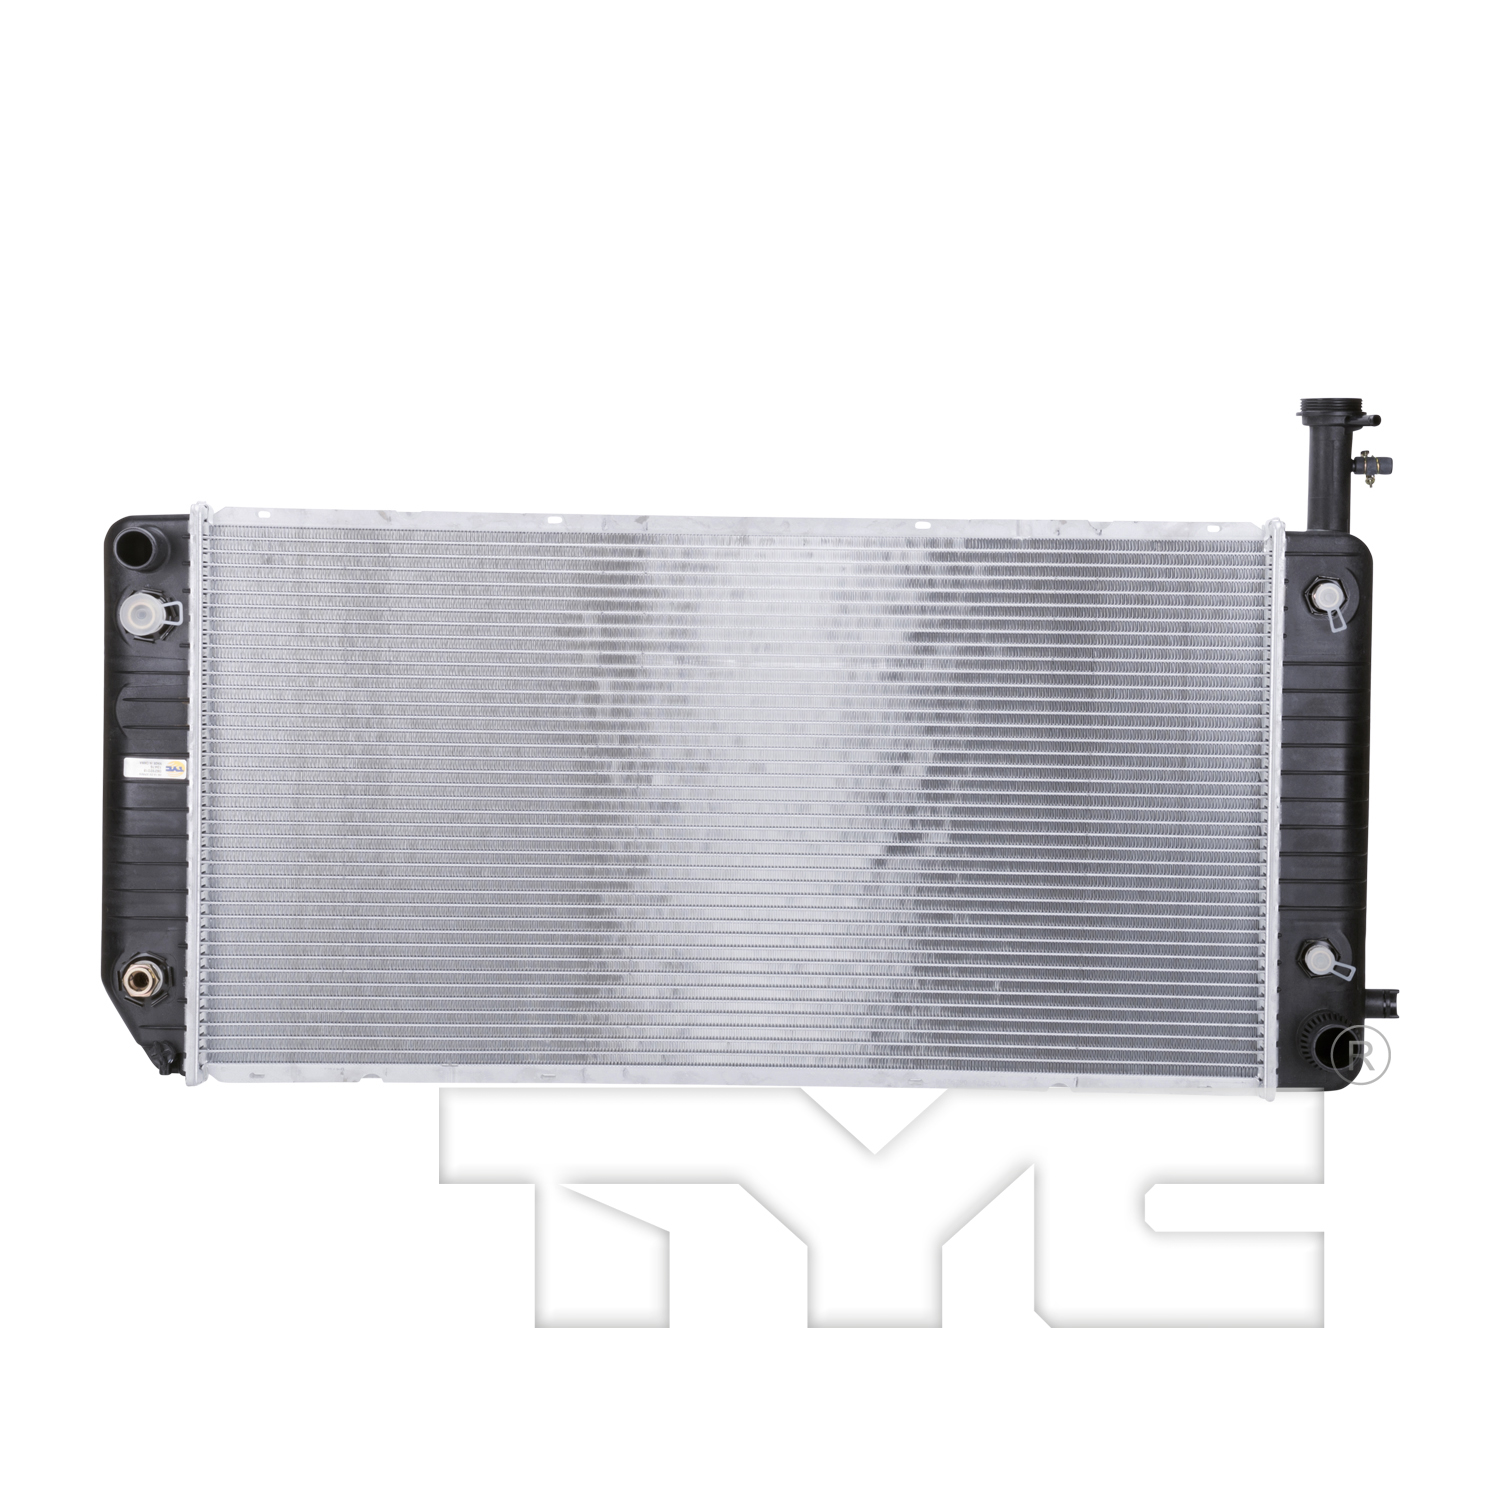 Aftermarket RADIATORS for CHEVROLET - EXPRESS 1500, EXPRESS 1500,09-14,Radiator assembly